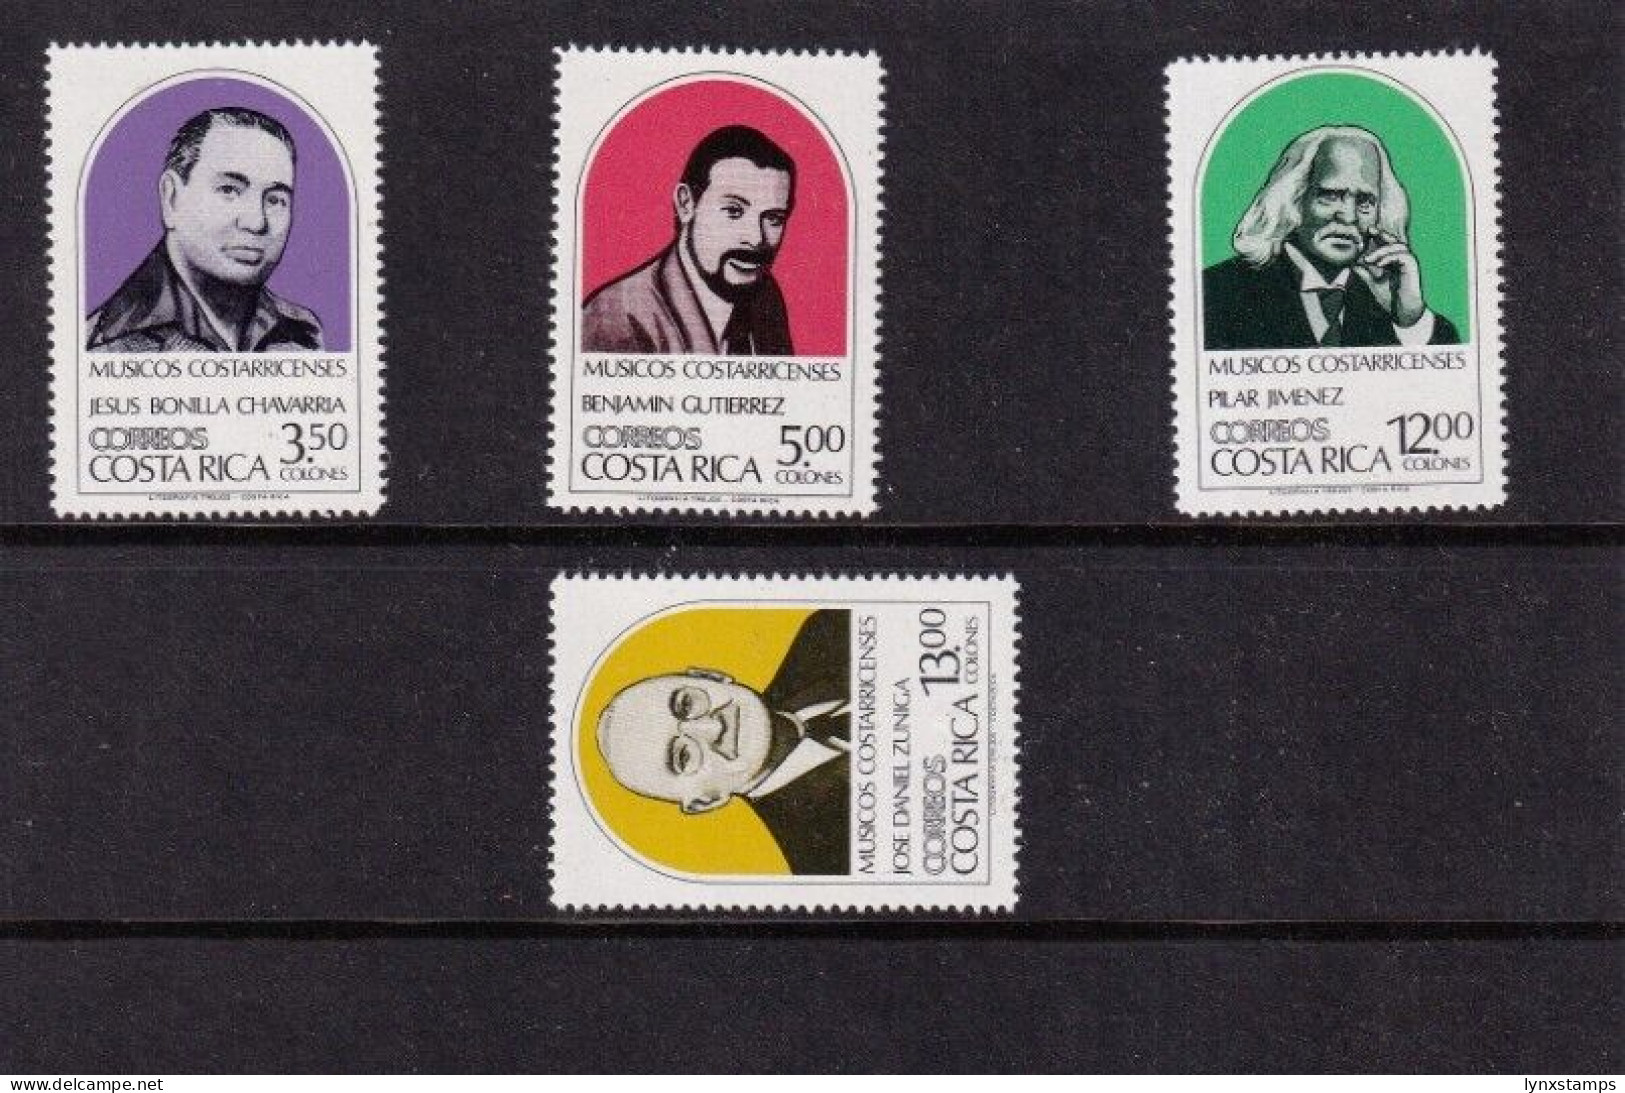 ER02 Costa Rica 1984 Musicians And Composers - MNH Stamps - Costa Rica